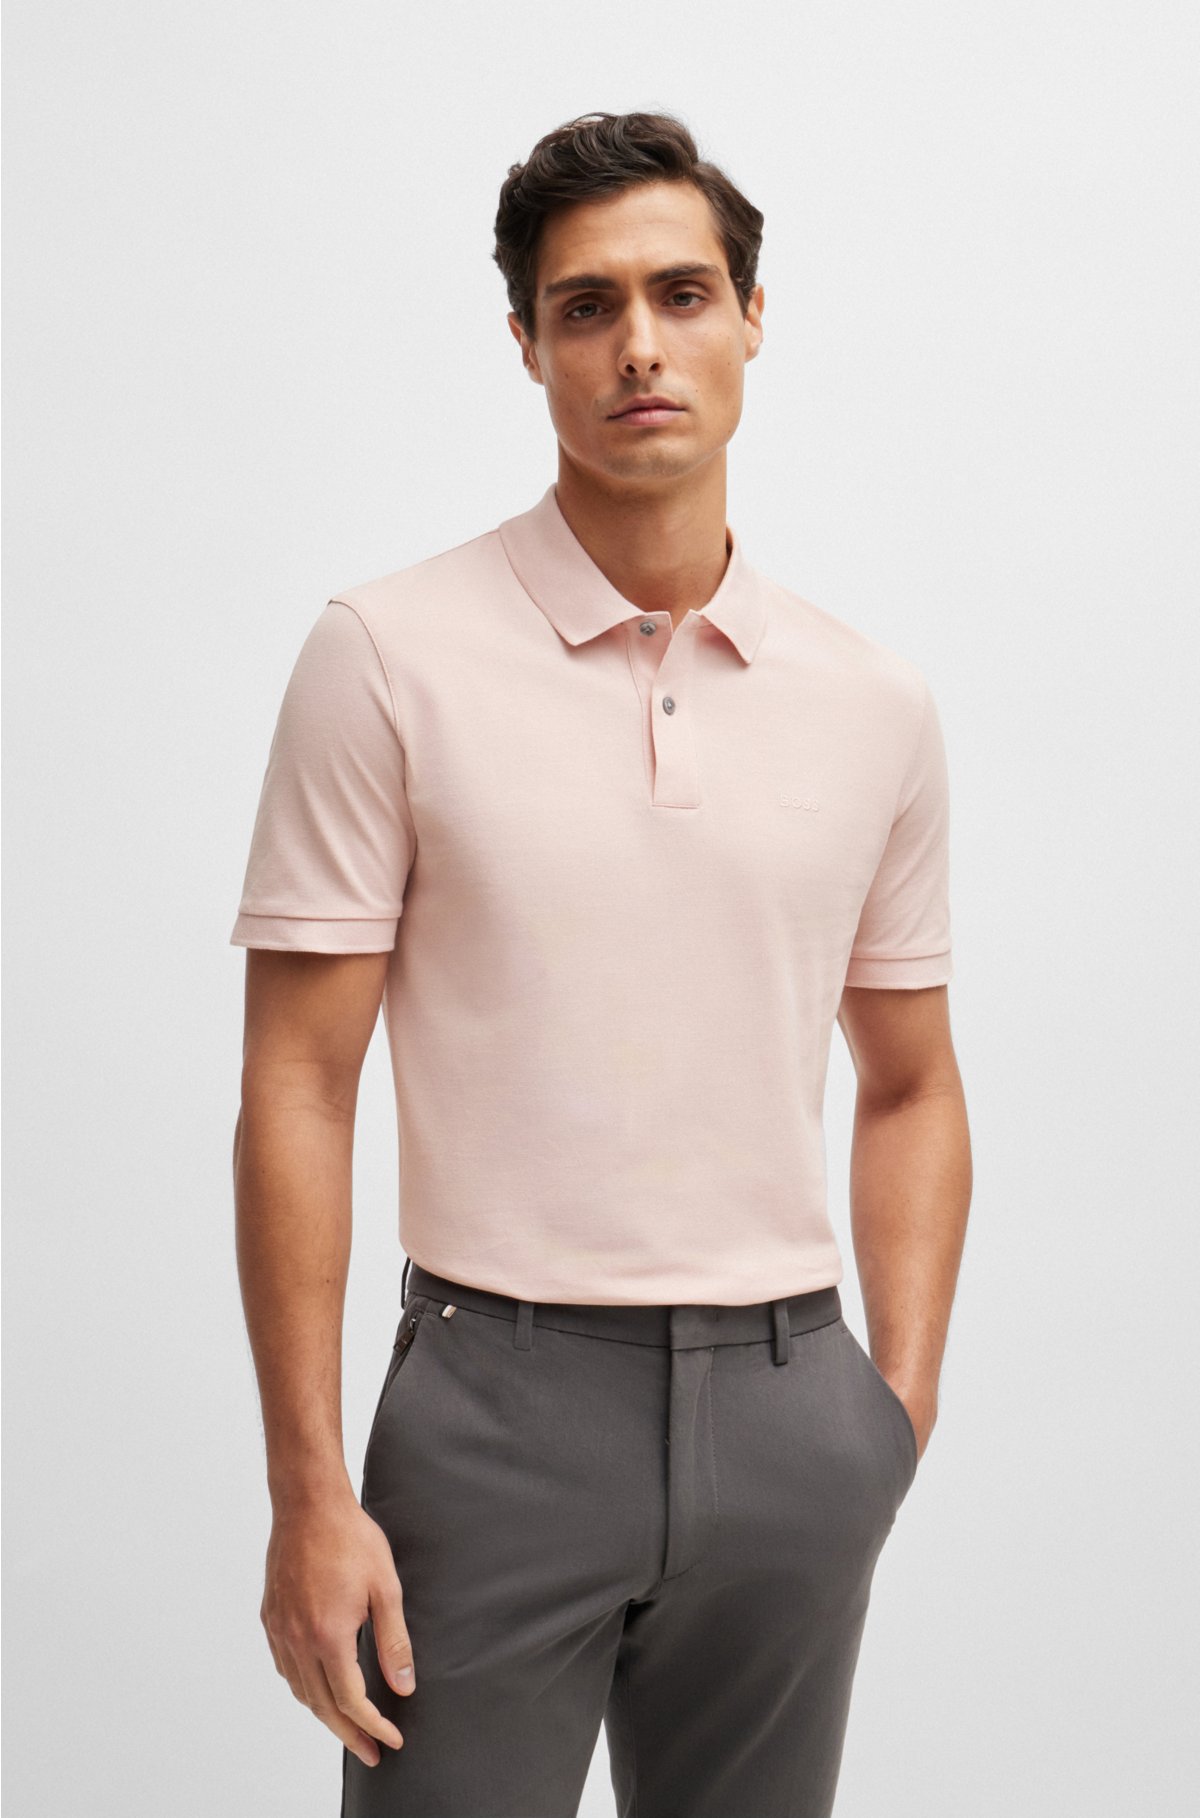 Cotton polo shirt with embroidered logo, light pink